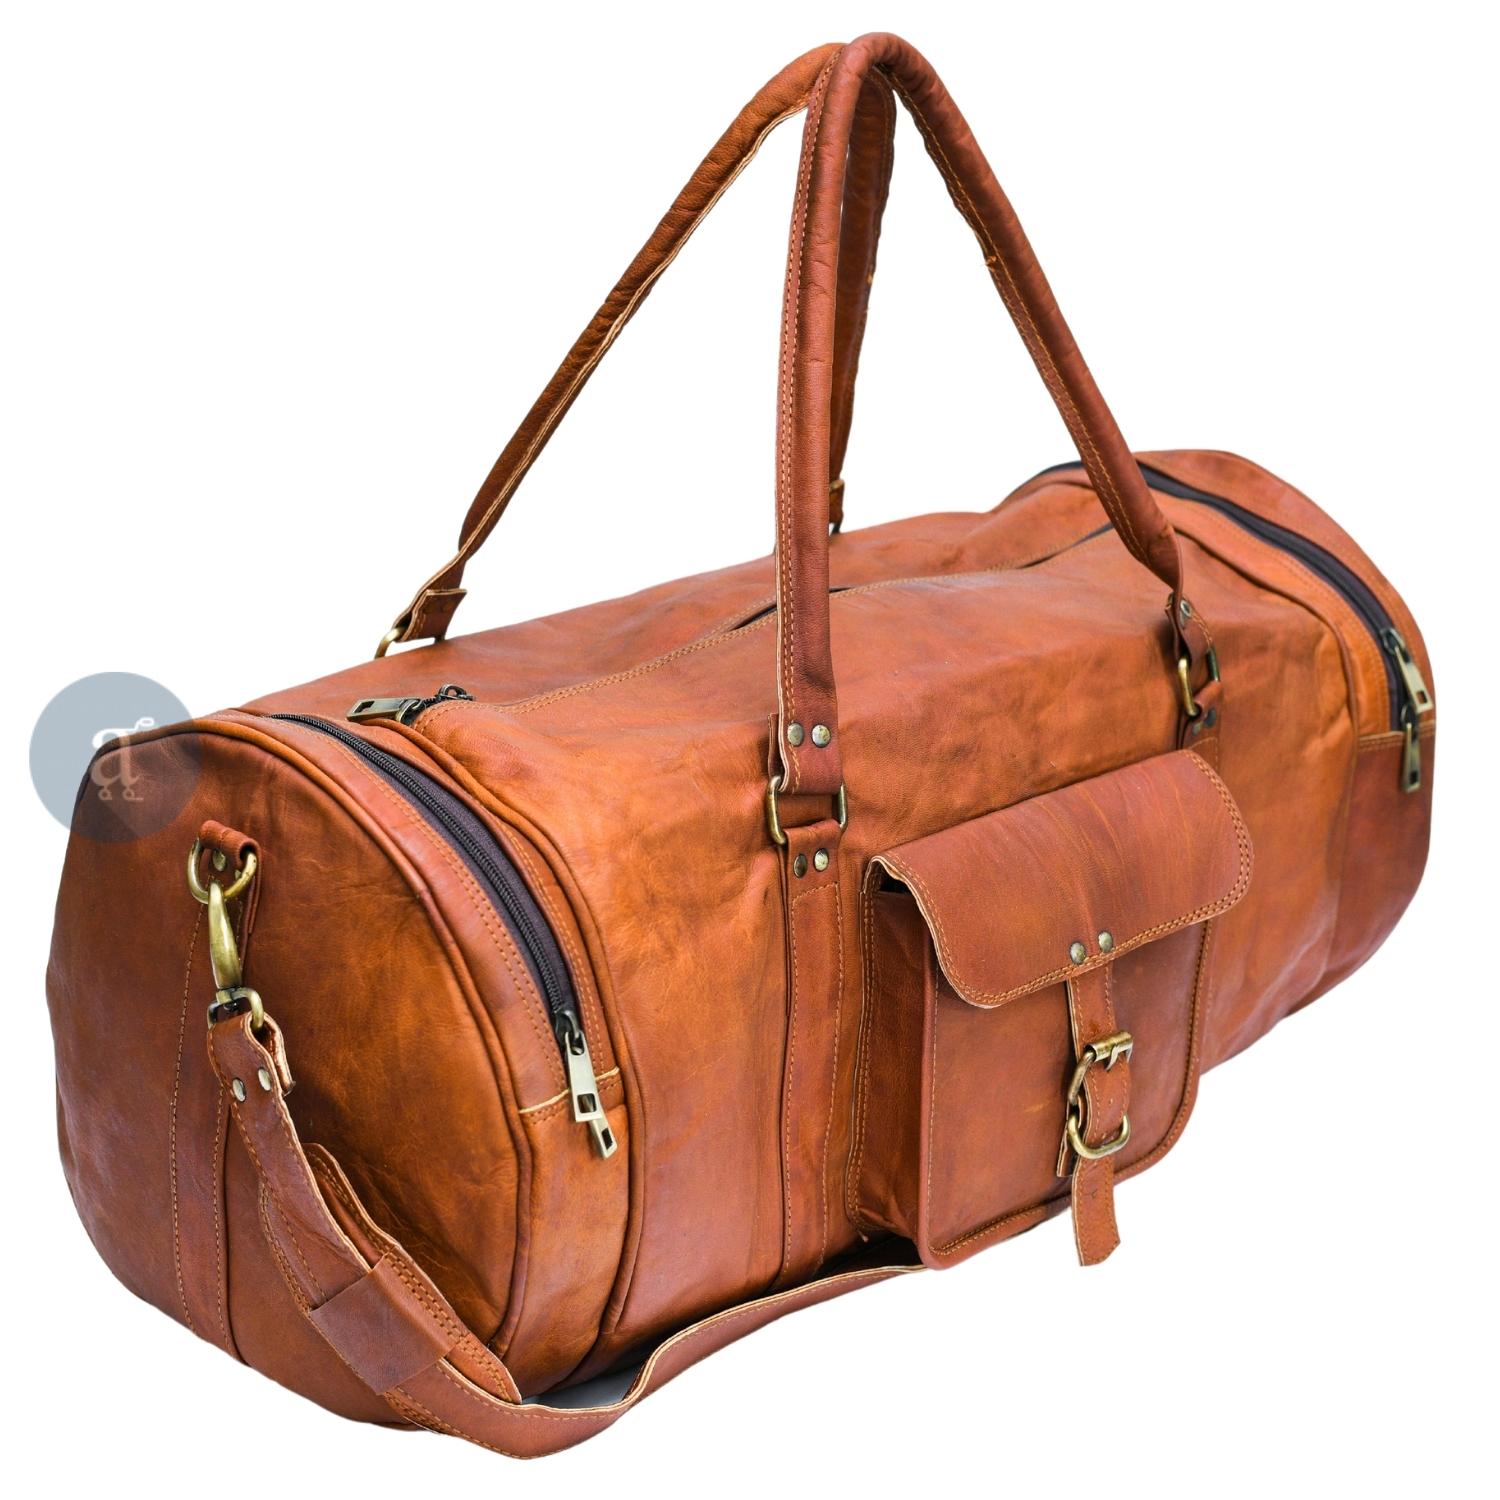 Leather Weekend Bag For Women Top Handles